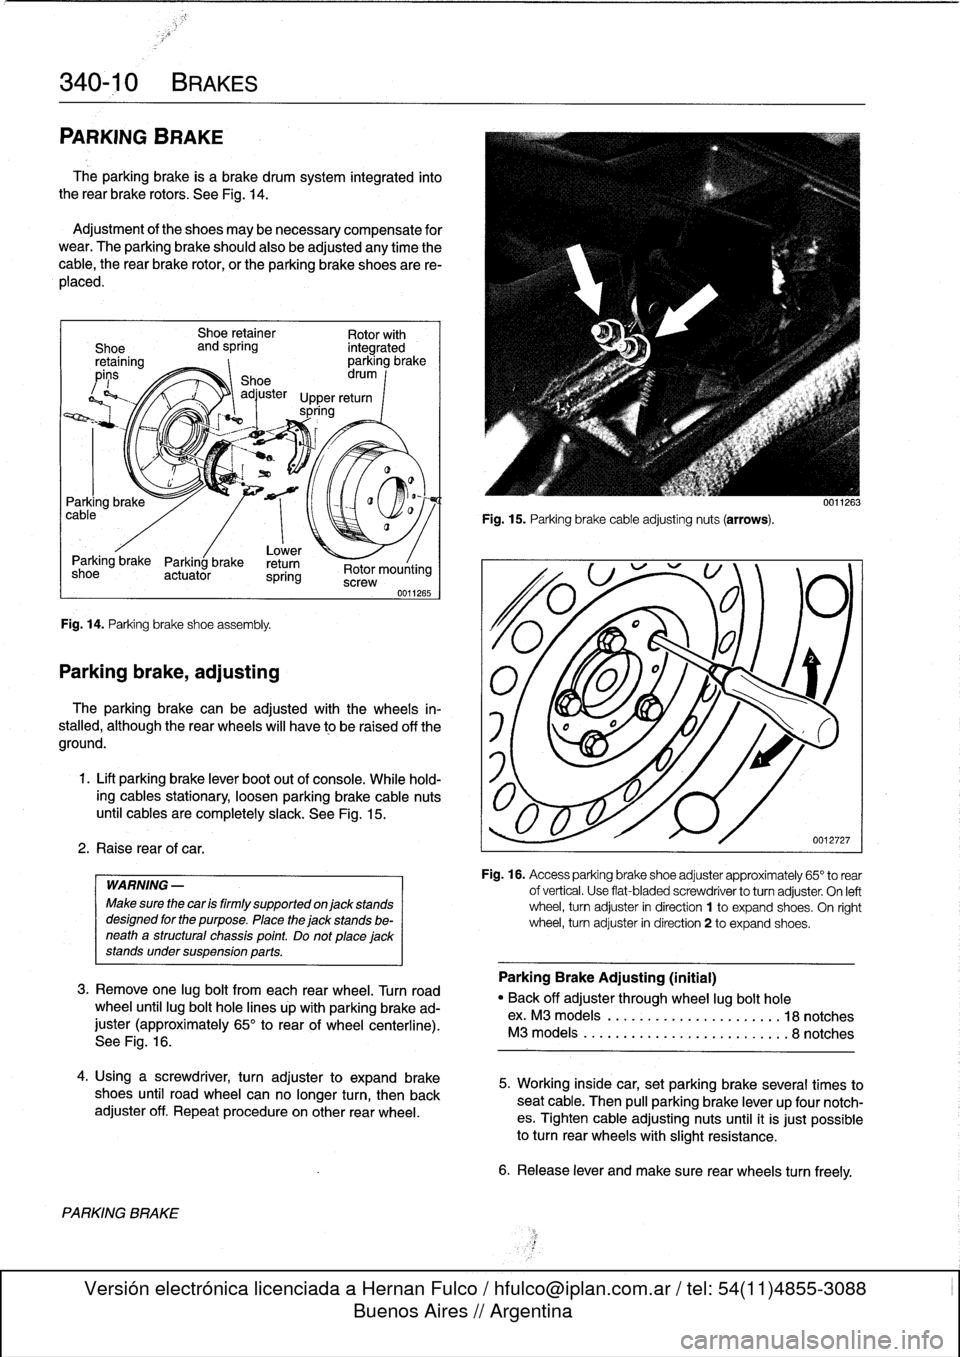 BMW 323i 1993 E36 Owners Guide 
340-
1
0
BRAKES

PARKING
BRAKE

The
parking
brake
is
a
brake
drum
system
integrated
into
the
rear
brake
rotors
.
See
Fig
.
14
.

Adjustment
of
the
shoes
may
benecessary
compensate
for
wear
.
The
park